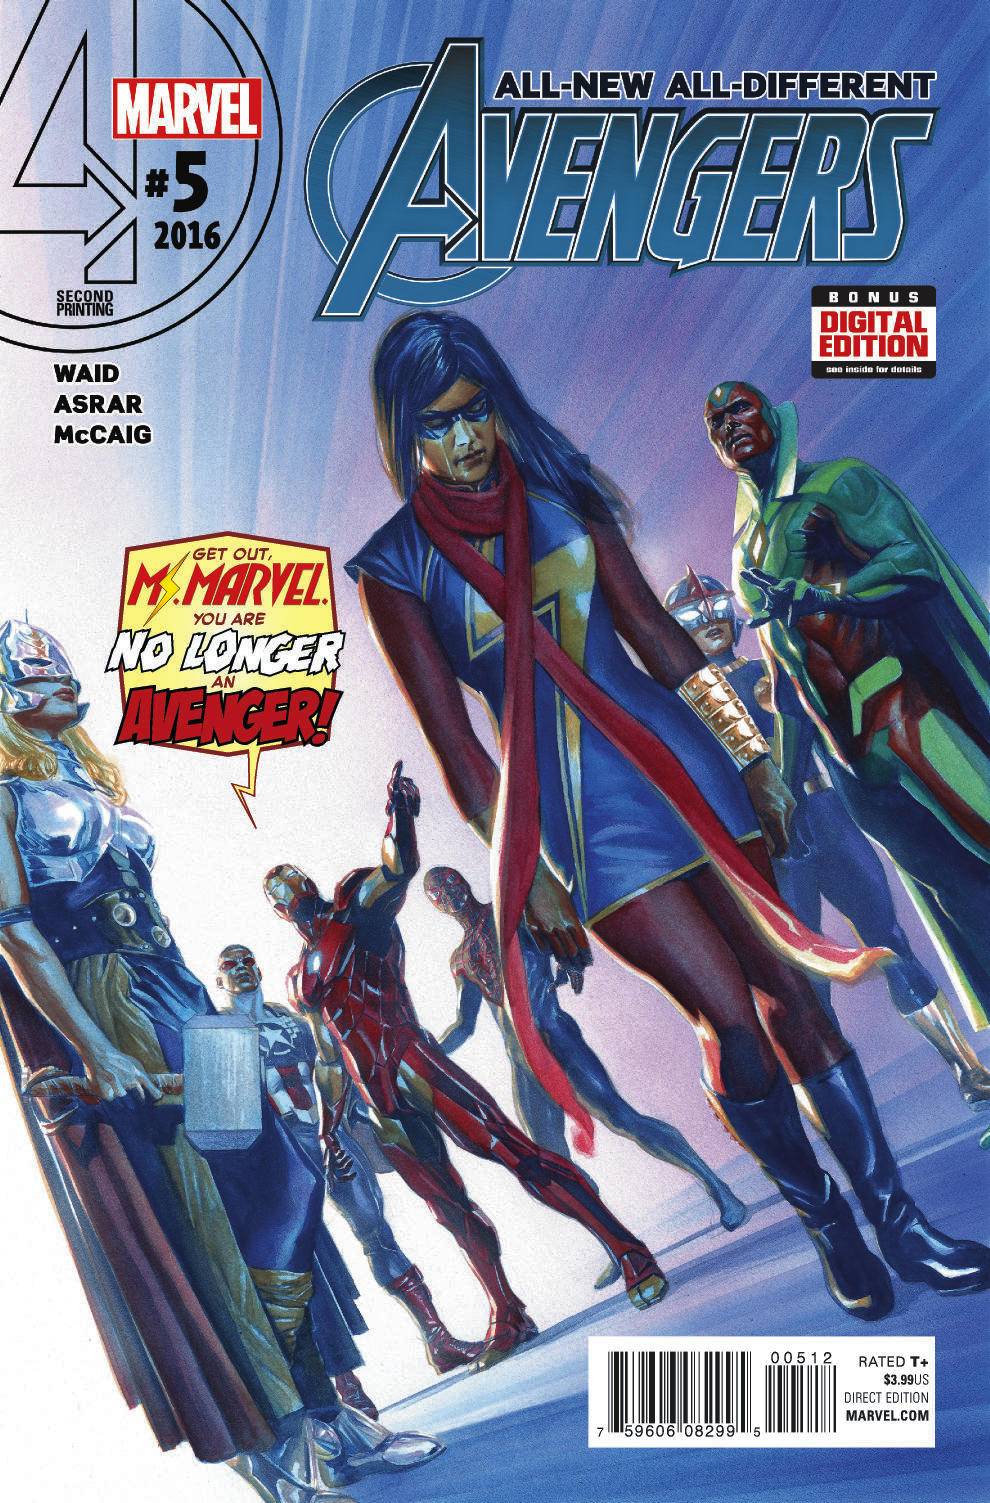 All New All Different Avengers #5 Alex Ross 2nd Printing Variant